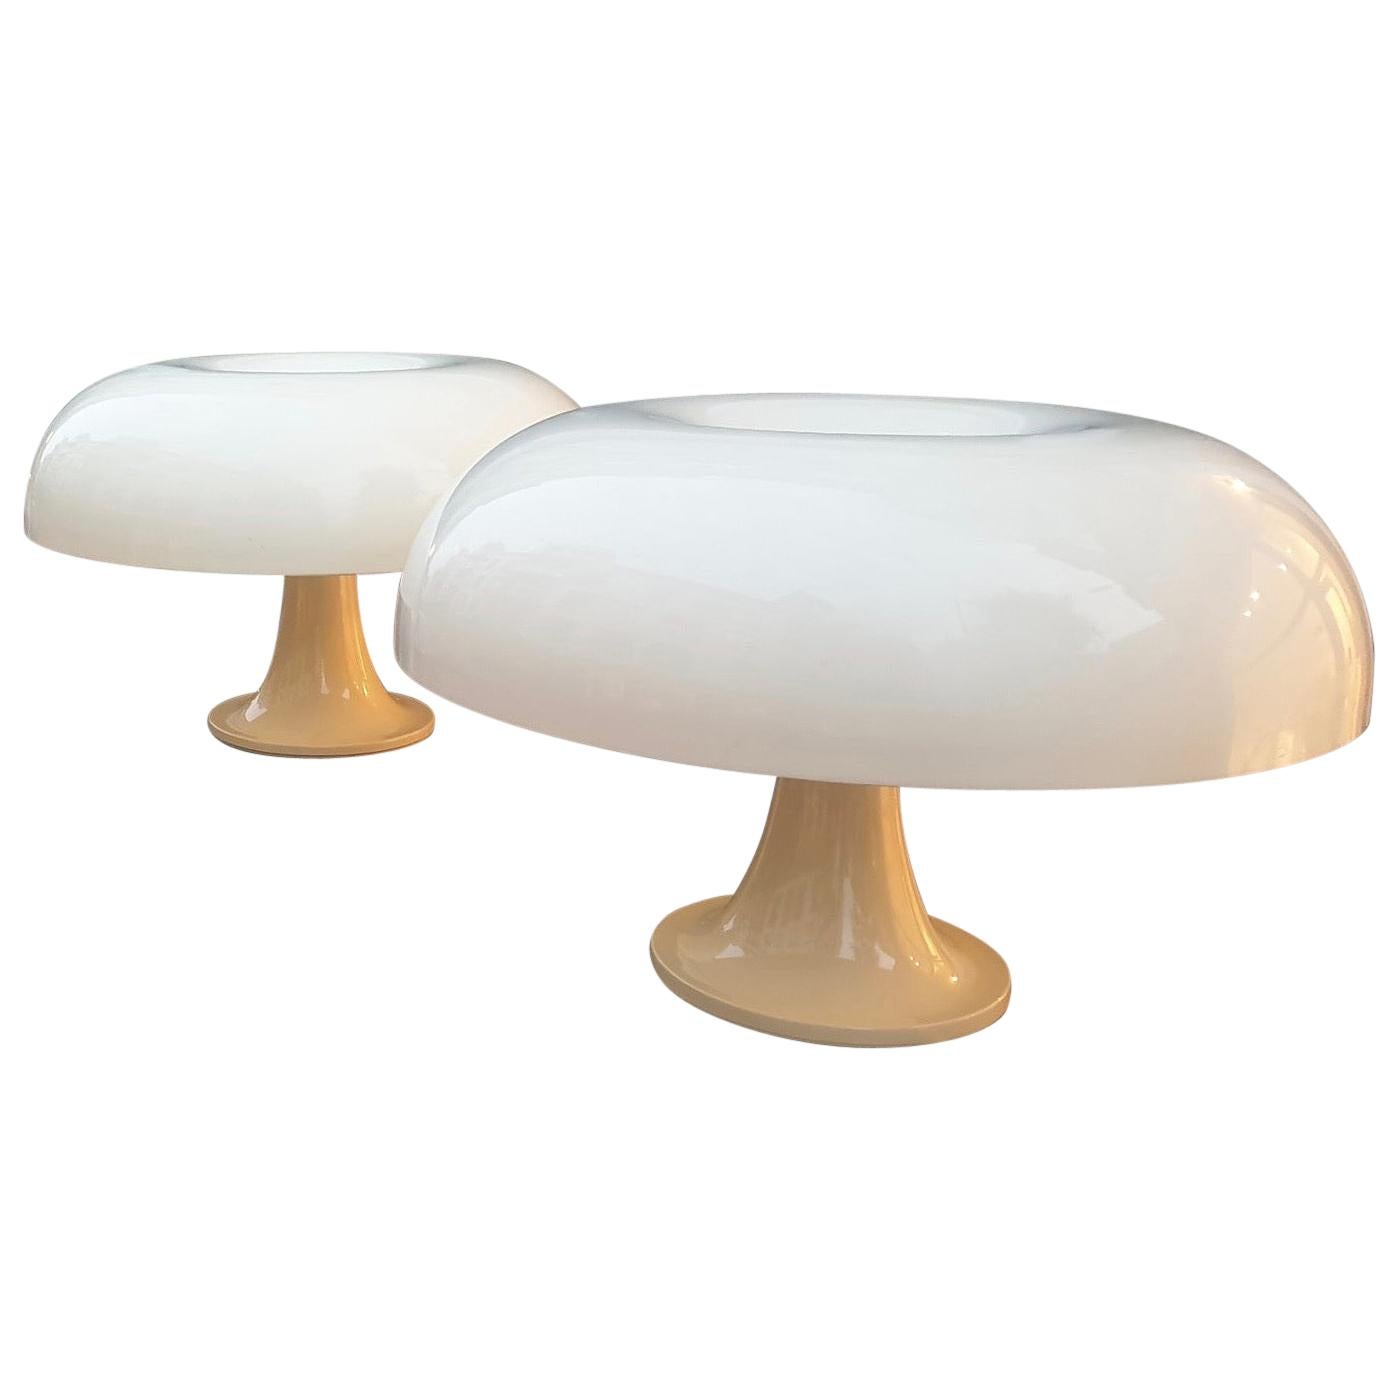 Pair of Giancarlo Mattioli Nesso Table Lamps by Artemide